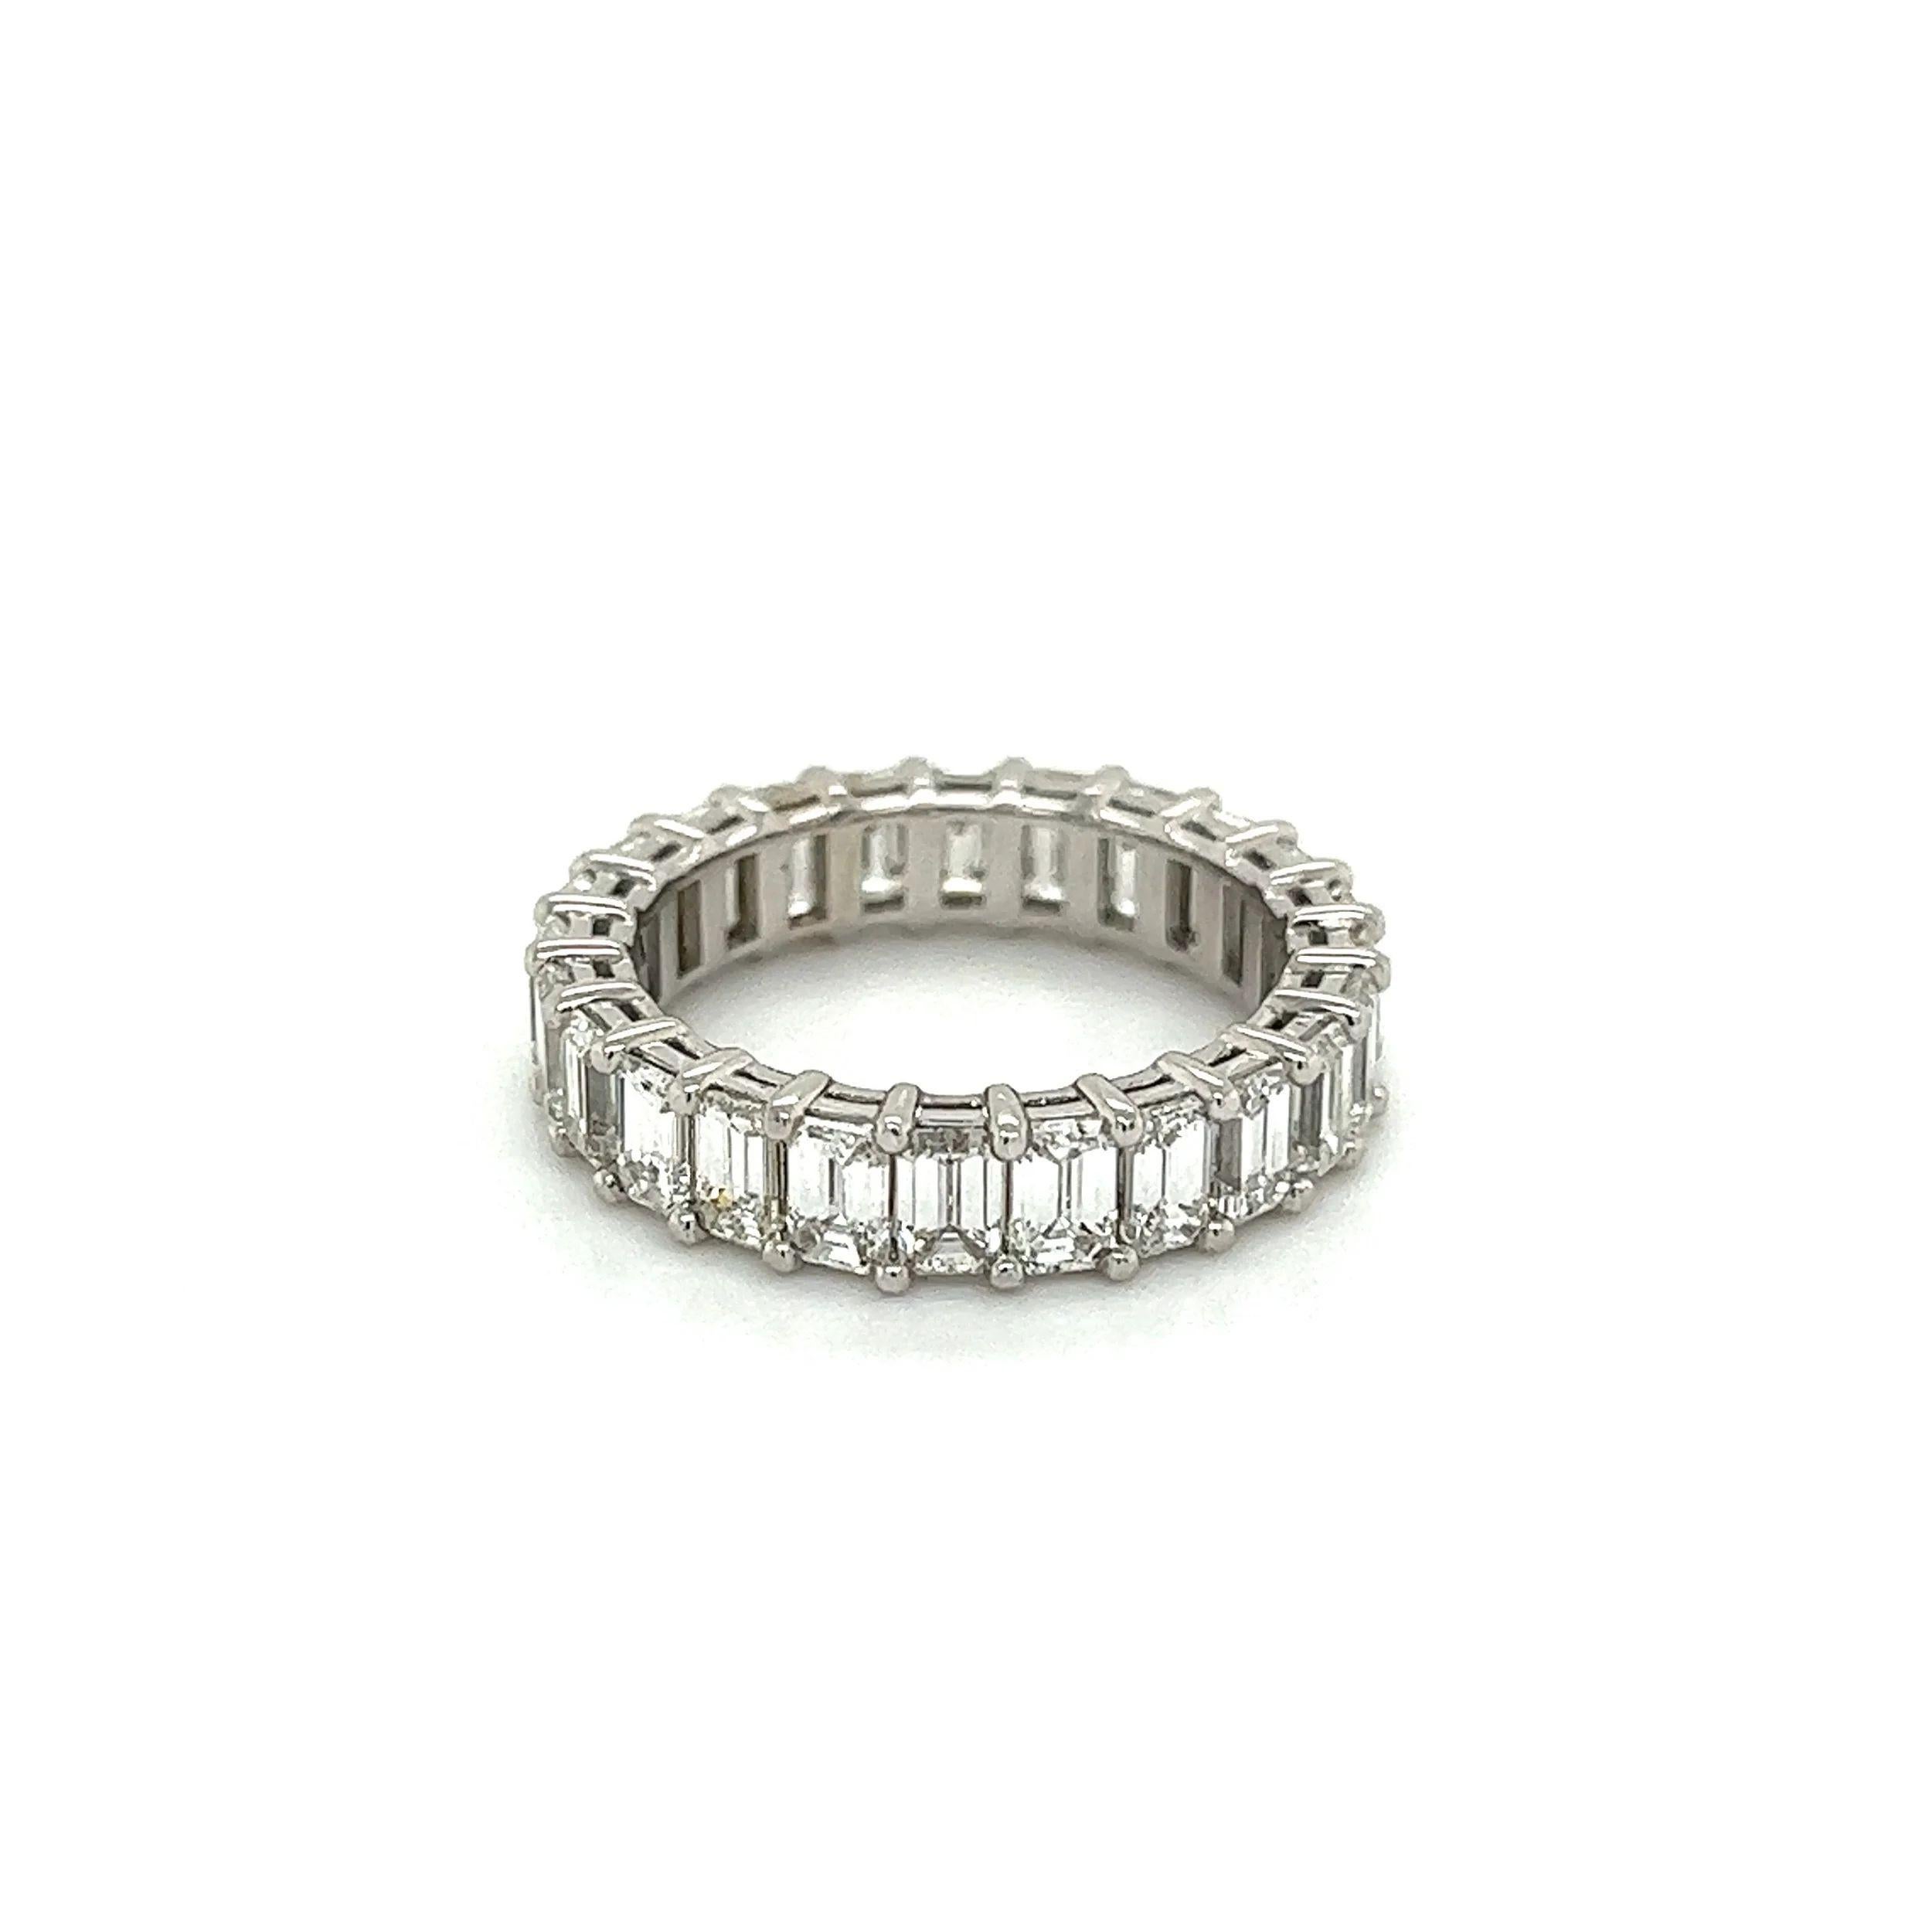 Emerald Cut Diamond Gold Vintage Eternity Band Ring Estate Fine Jewelry For Sale 1